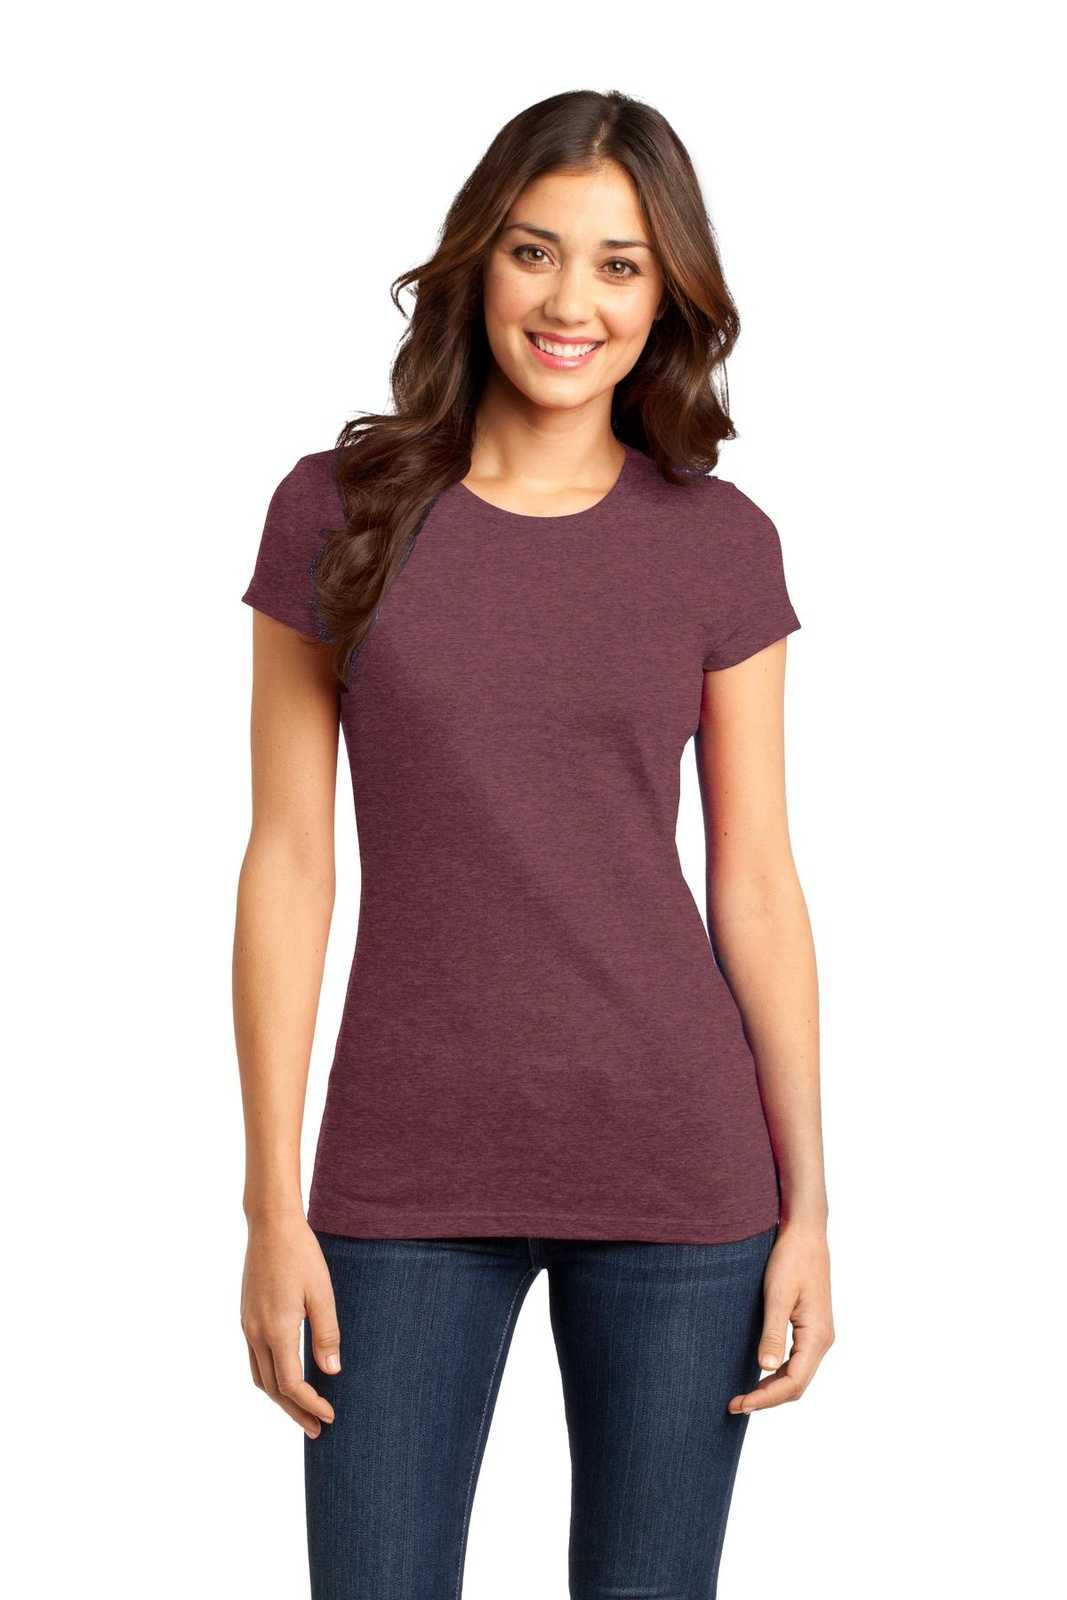 District DT6001 Women's Fitted Very Important Tee - Heathered Cardinal - HIT a Double - 1